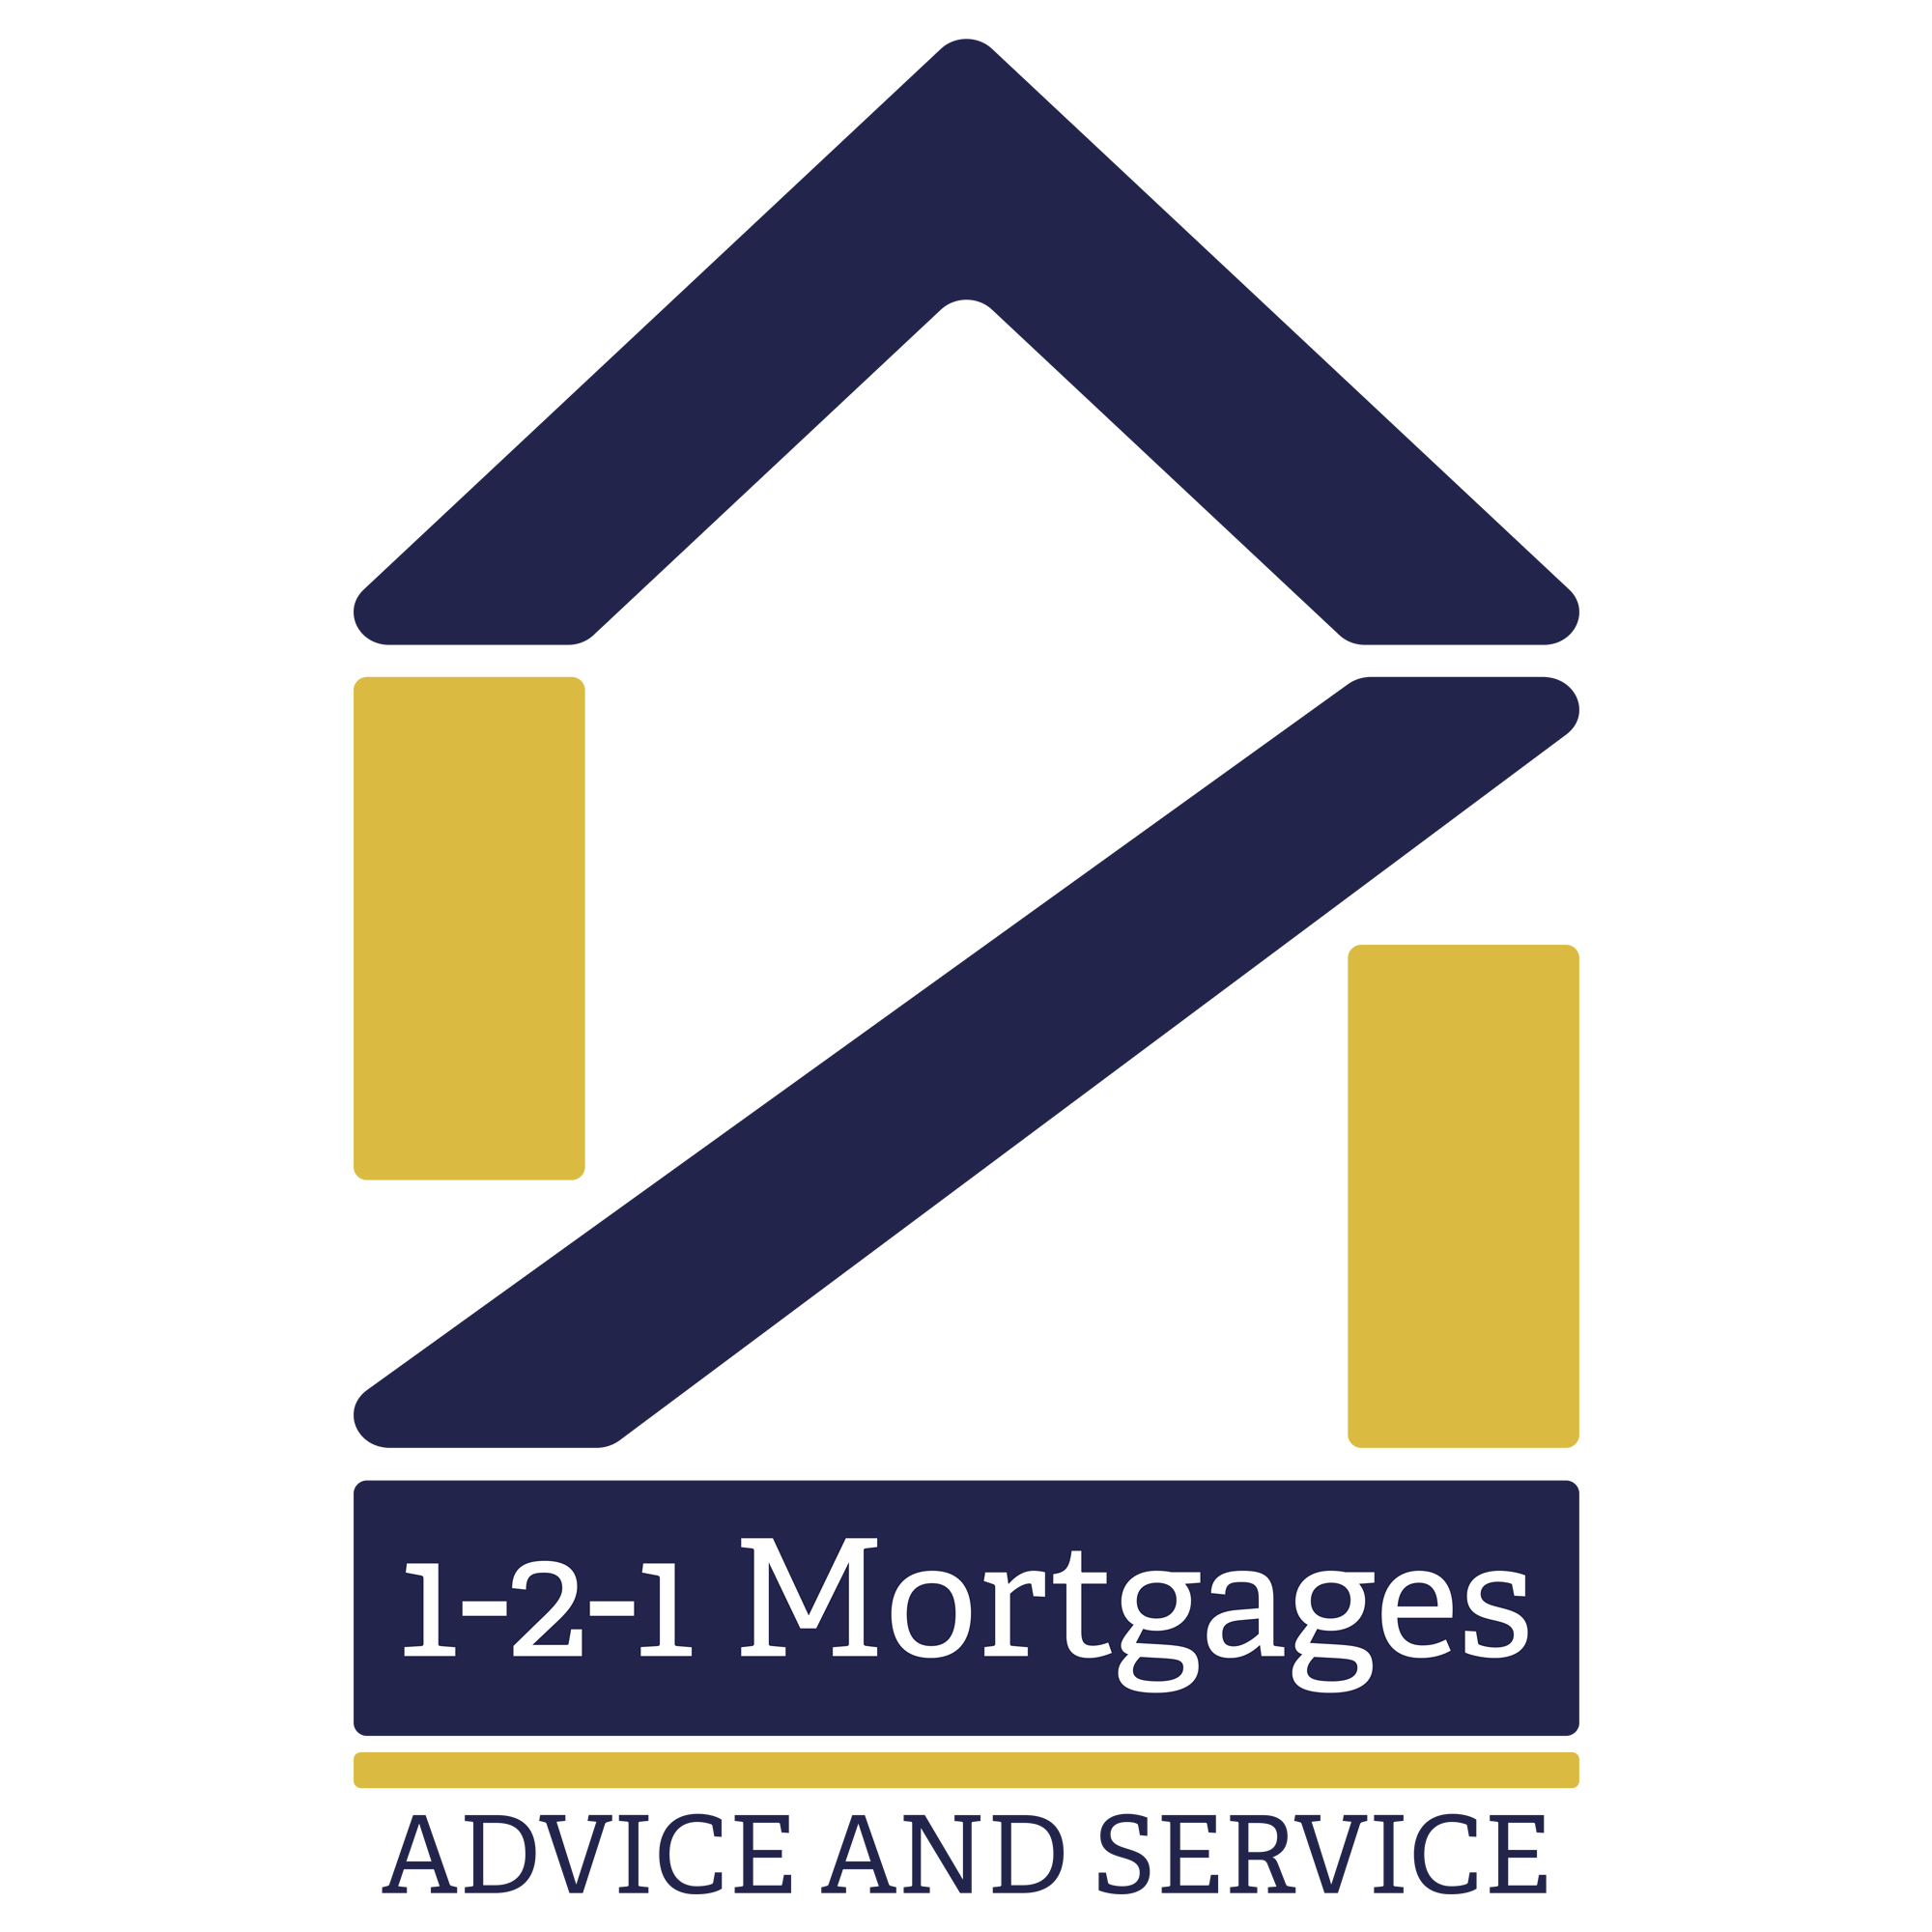 1-2-1 Mortgages